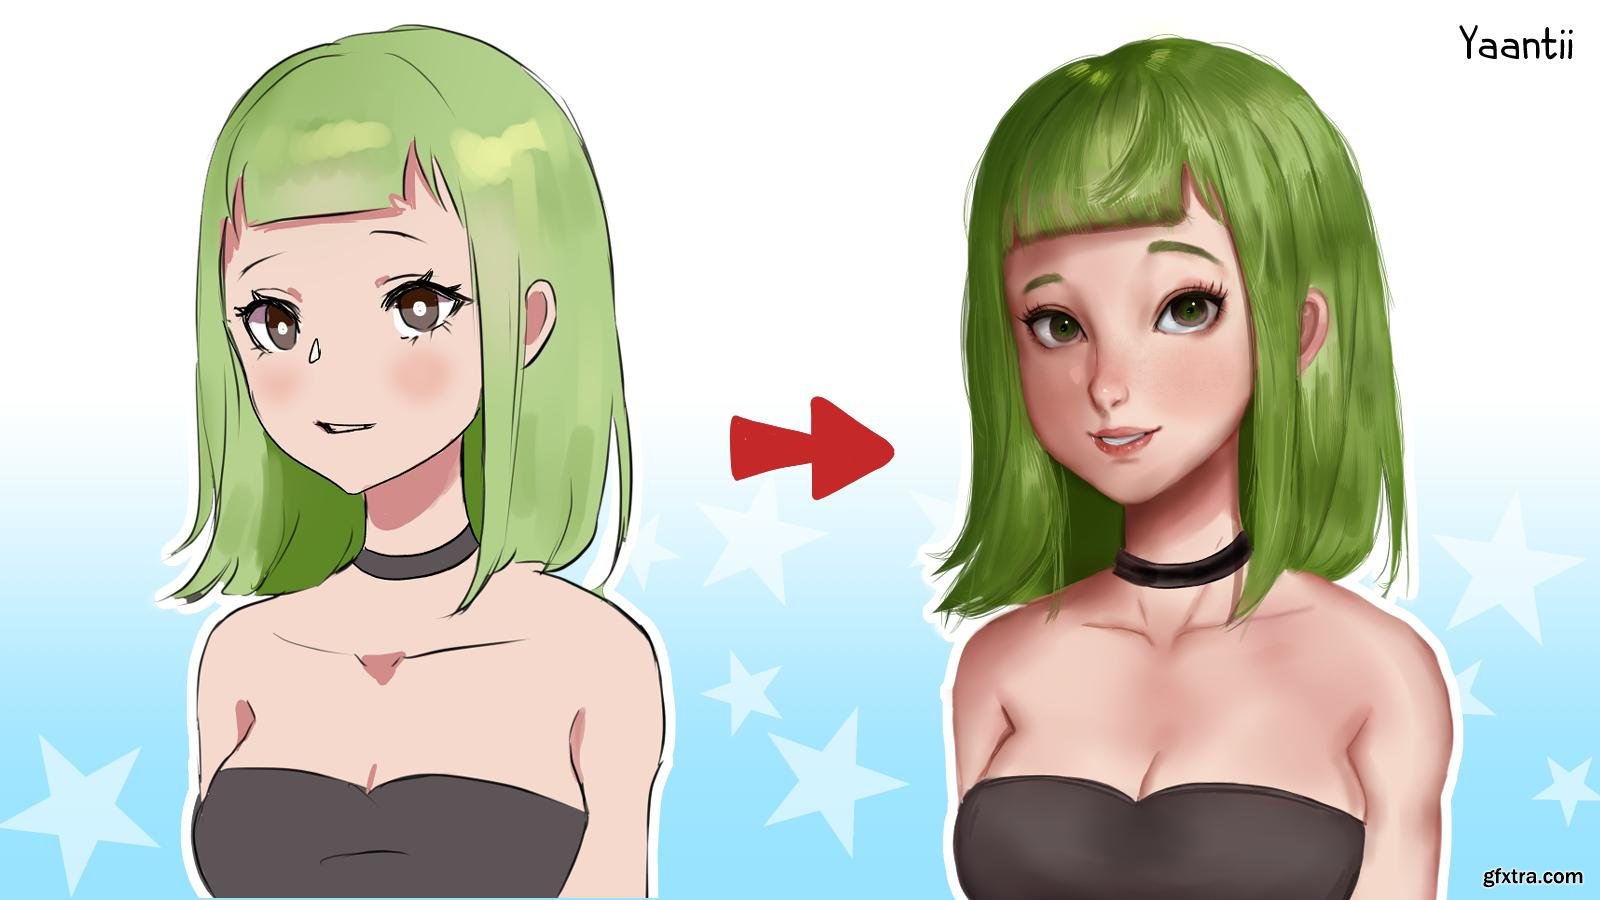 Paintover! From Anime to Semi-Realistic: Digital Painting » GFxtra